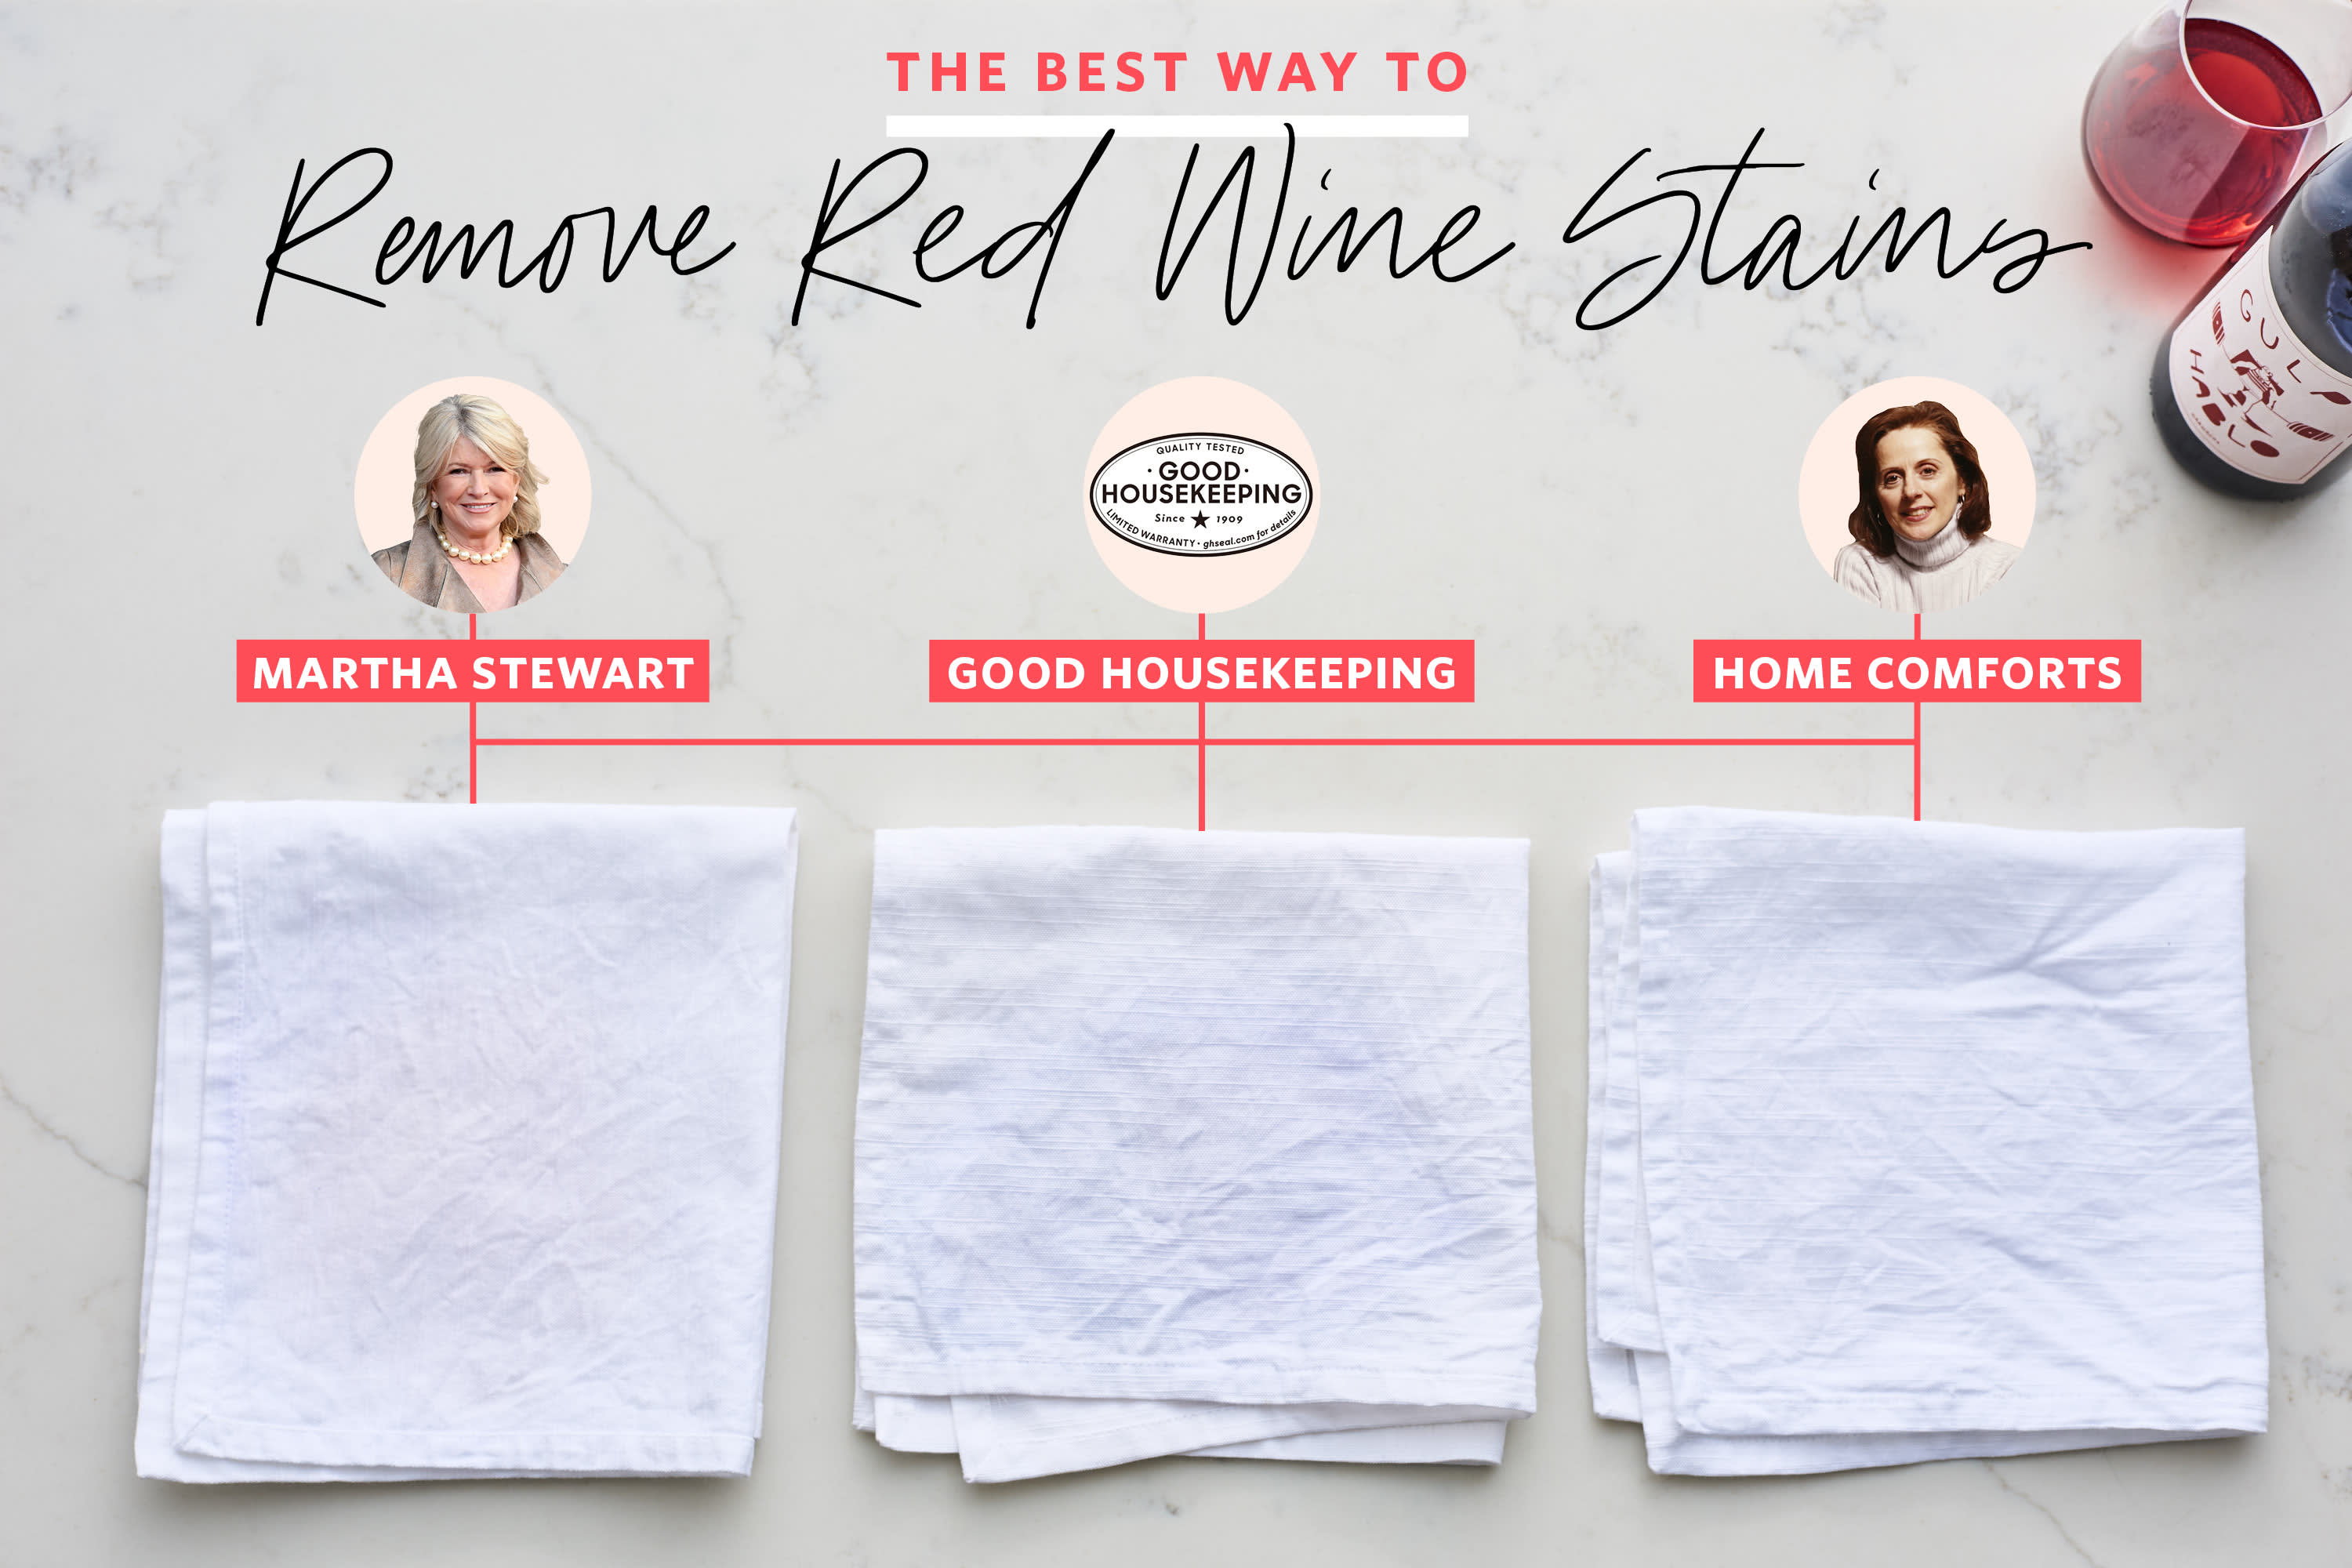 Martha Stewart's Red Wine Stain Method | Apartment Therapy